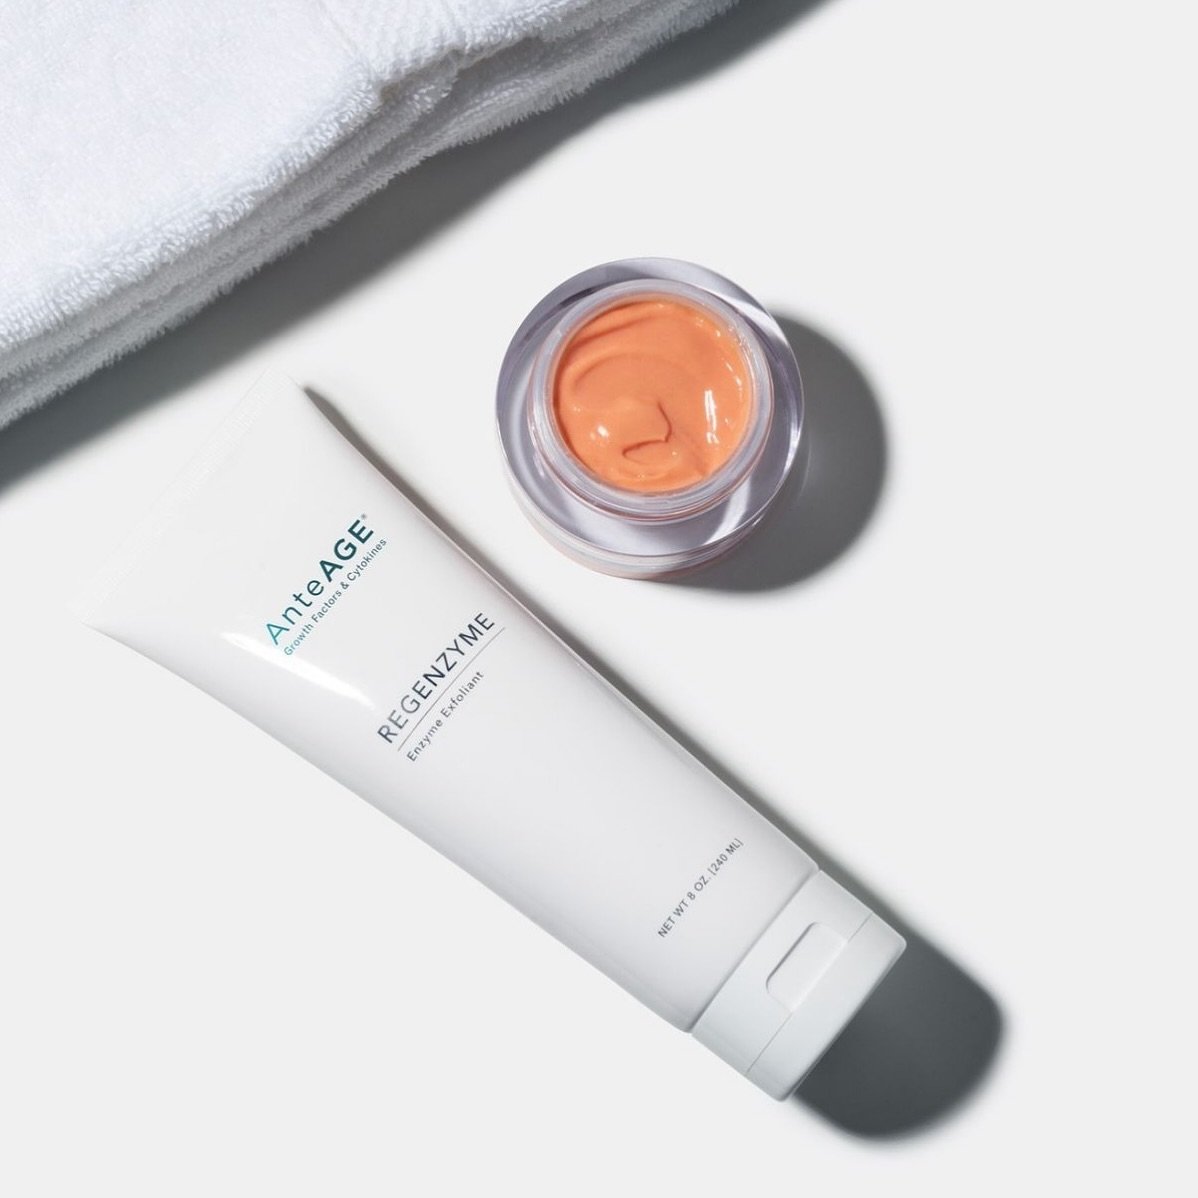 AnteAGE ✨ Regenzyme! A multi-tasking, gentle and effective approach to exfoliation. Professional treatments often rely on preparing the skin with surface exfoliants, whether mechanical, chemical or enzymatic. This non-acid blend of powerful botanical